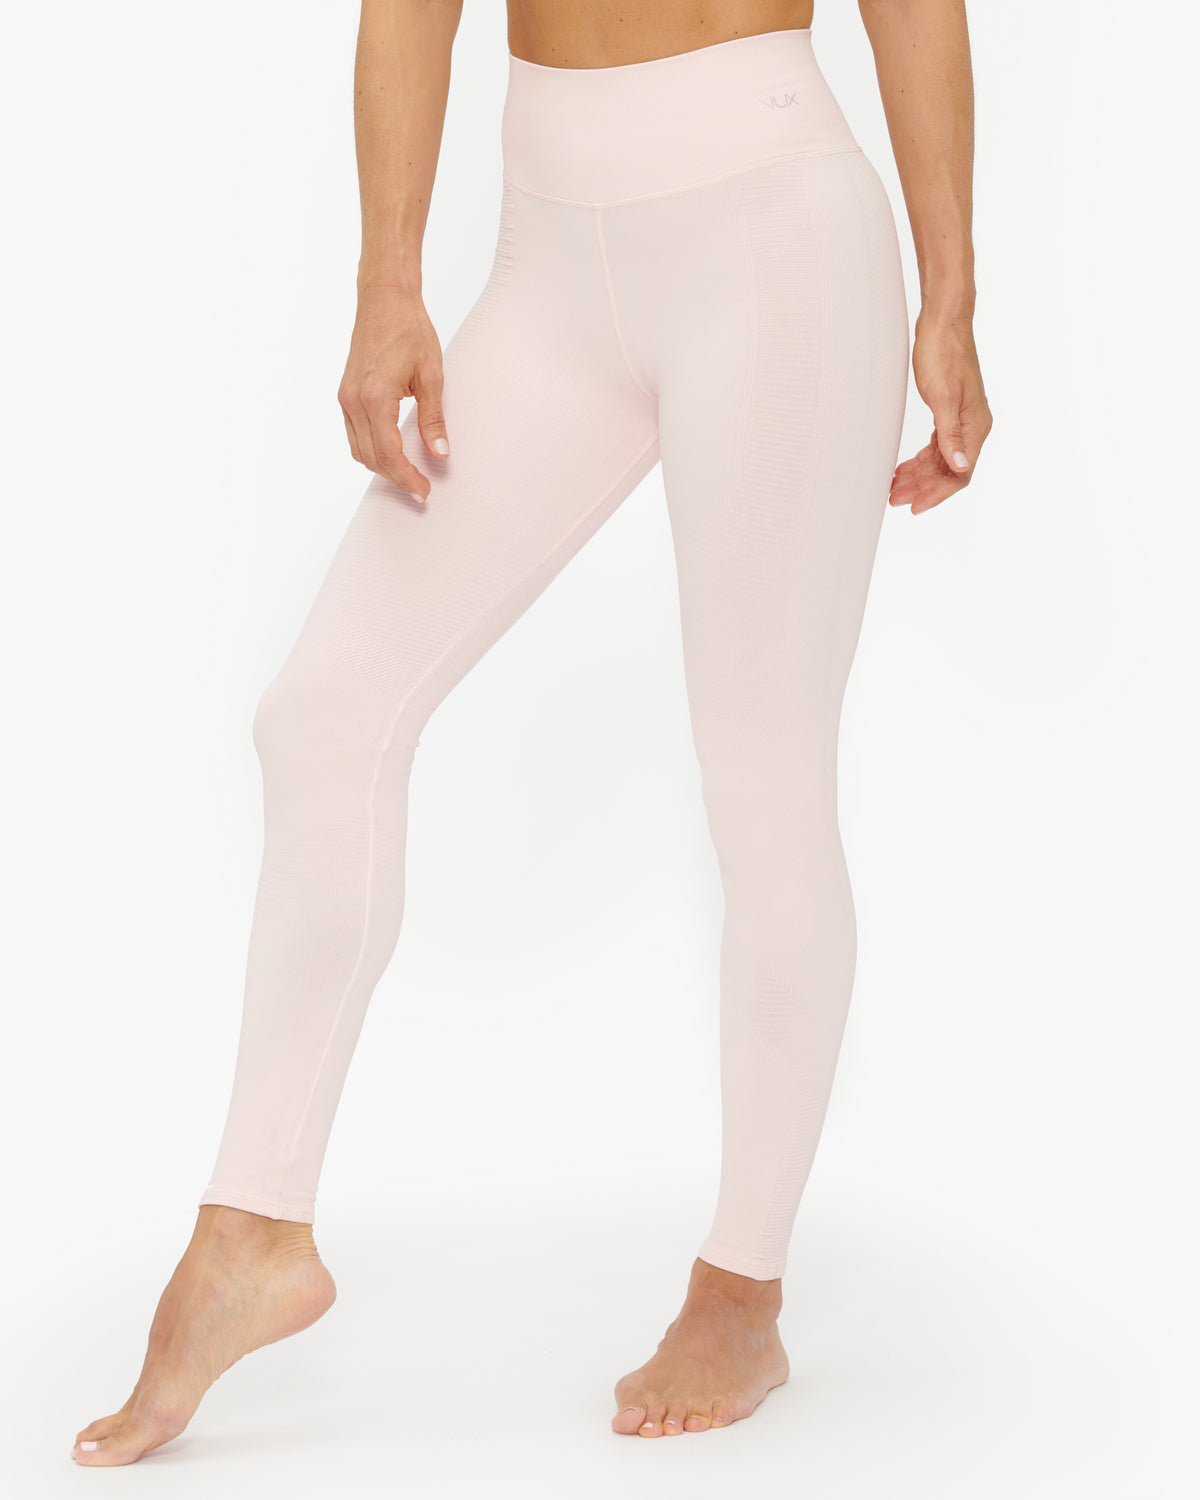 Nux One by One Legging